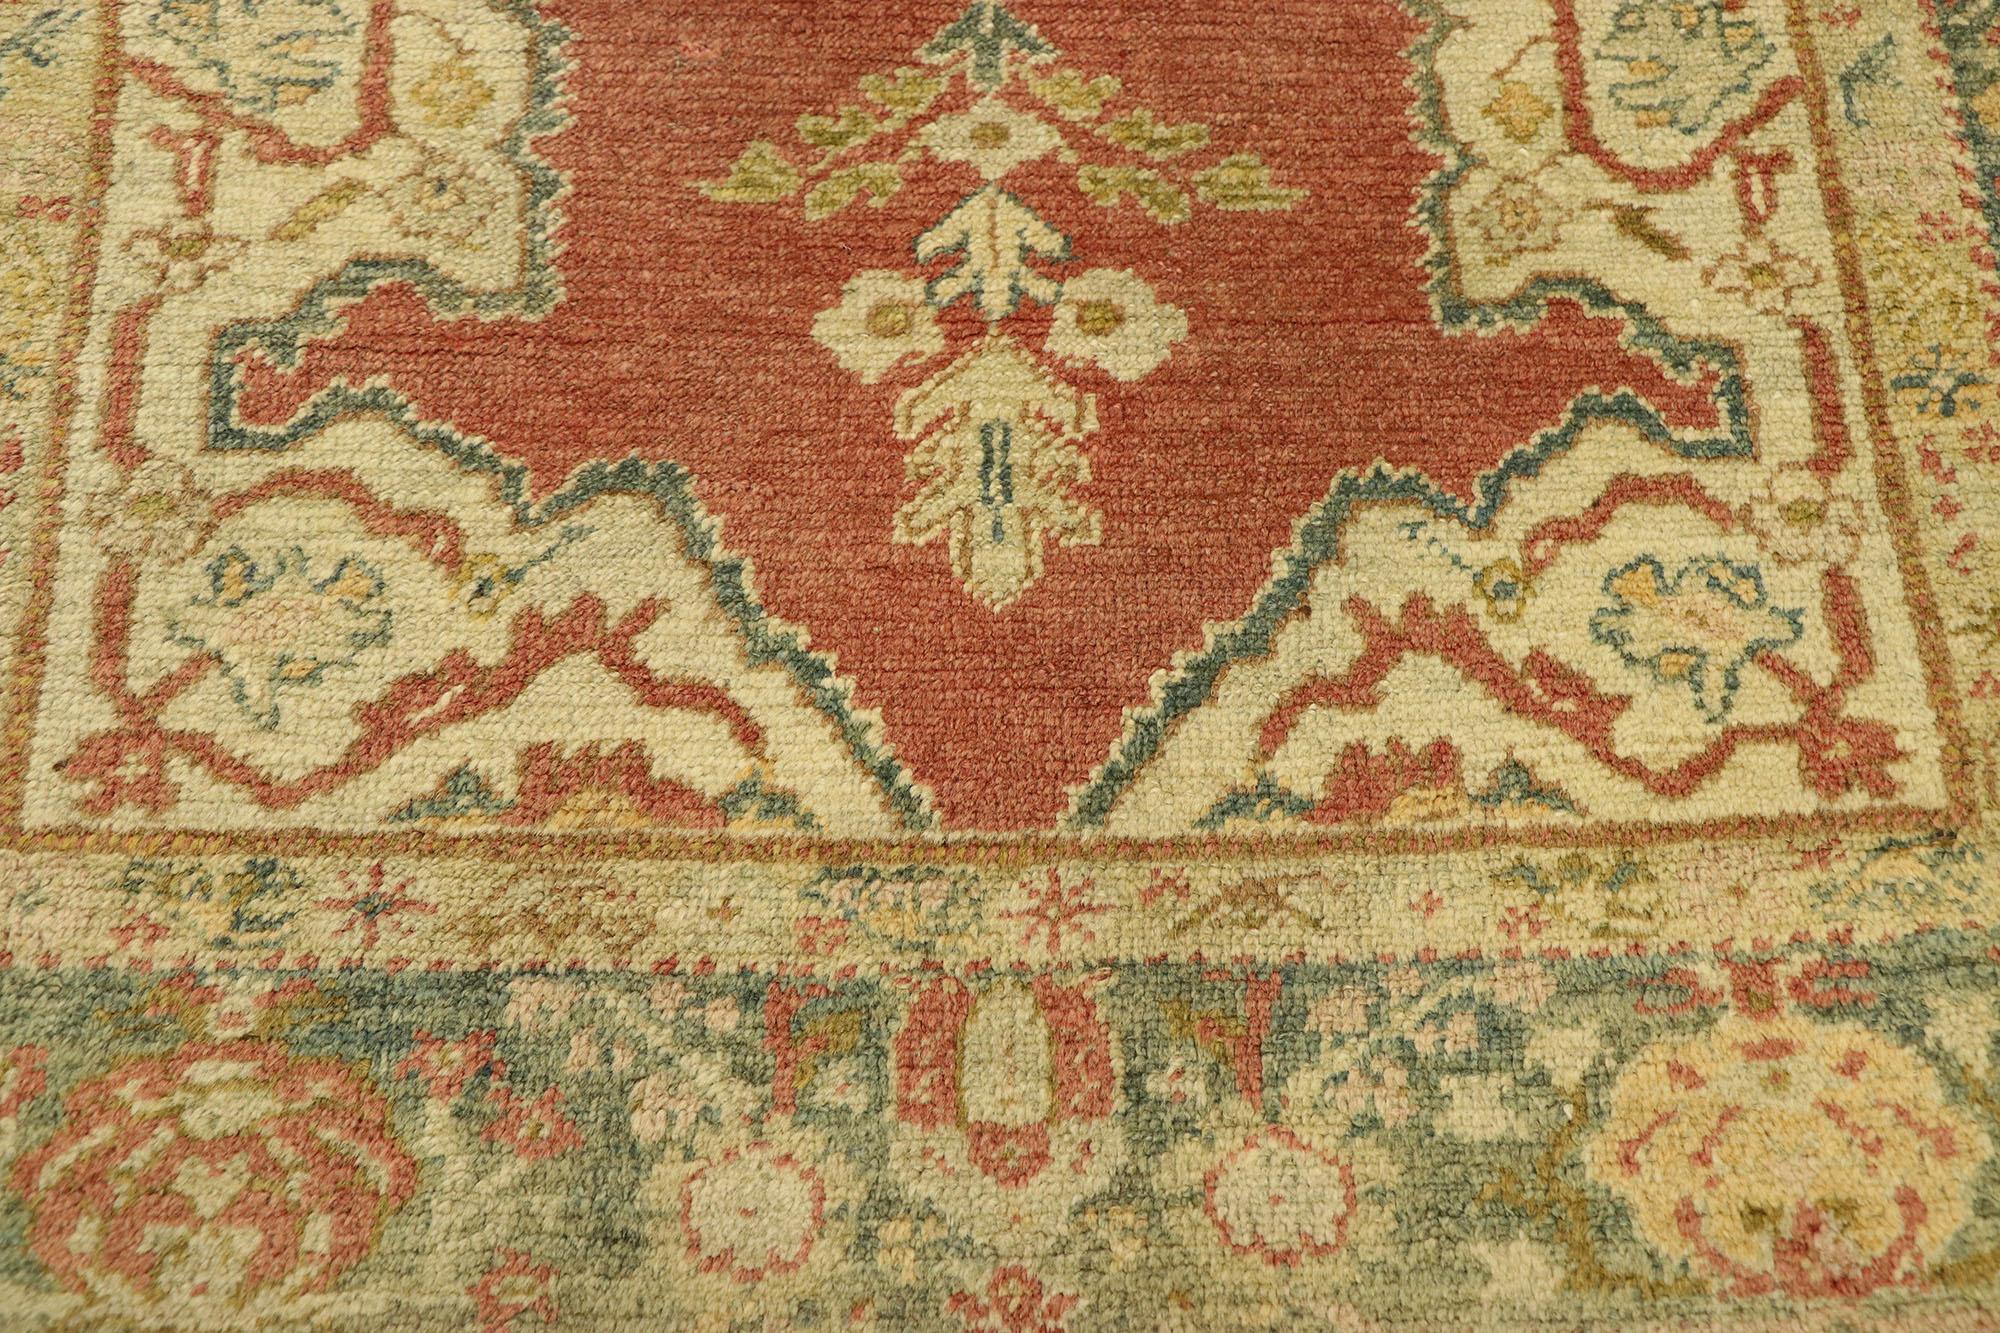 Vintage Red and Green Turkish Oushak Carpet In Good Condition For Sale In Dallas, TX